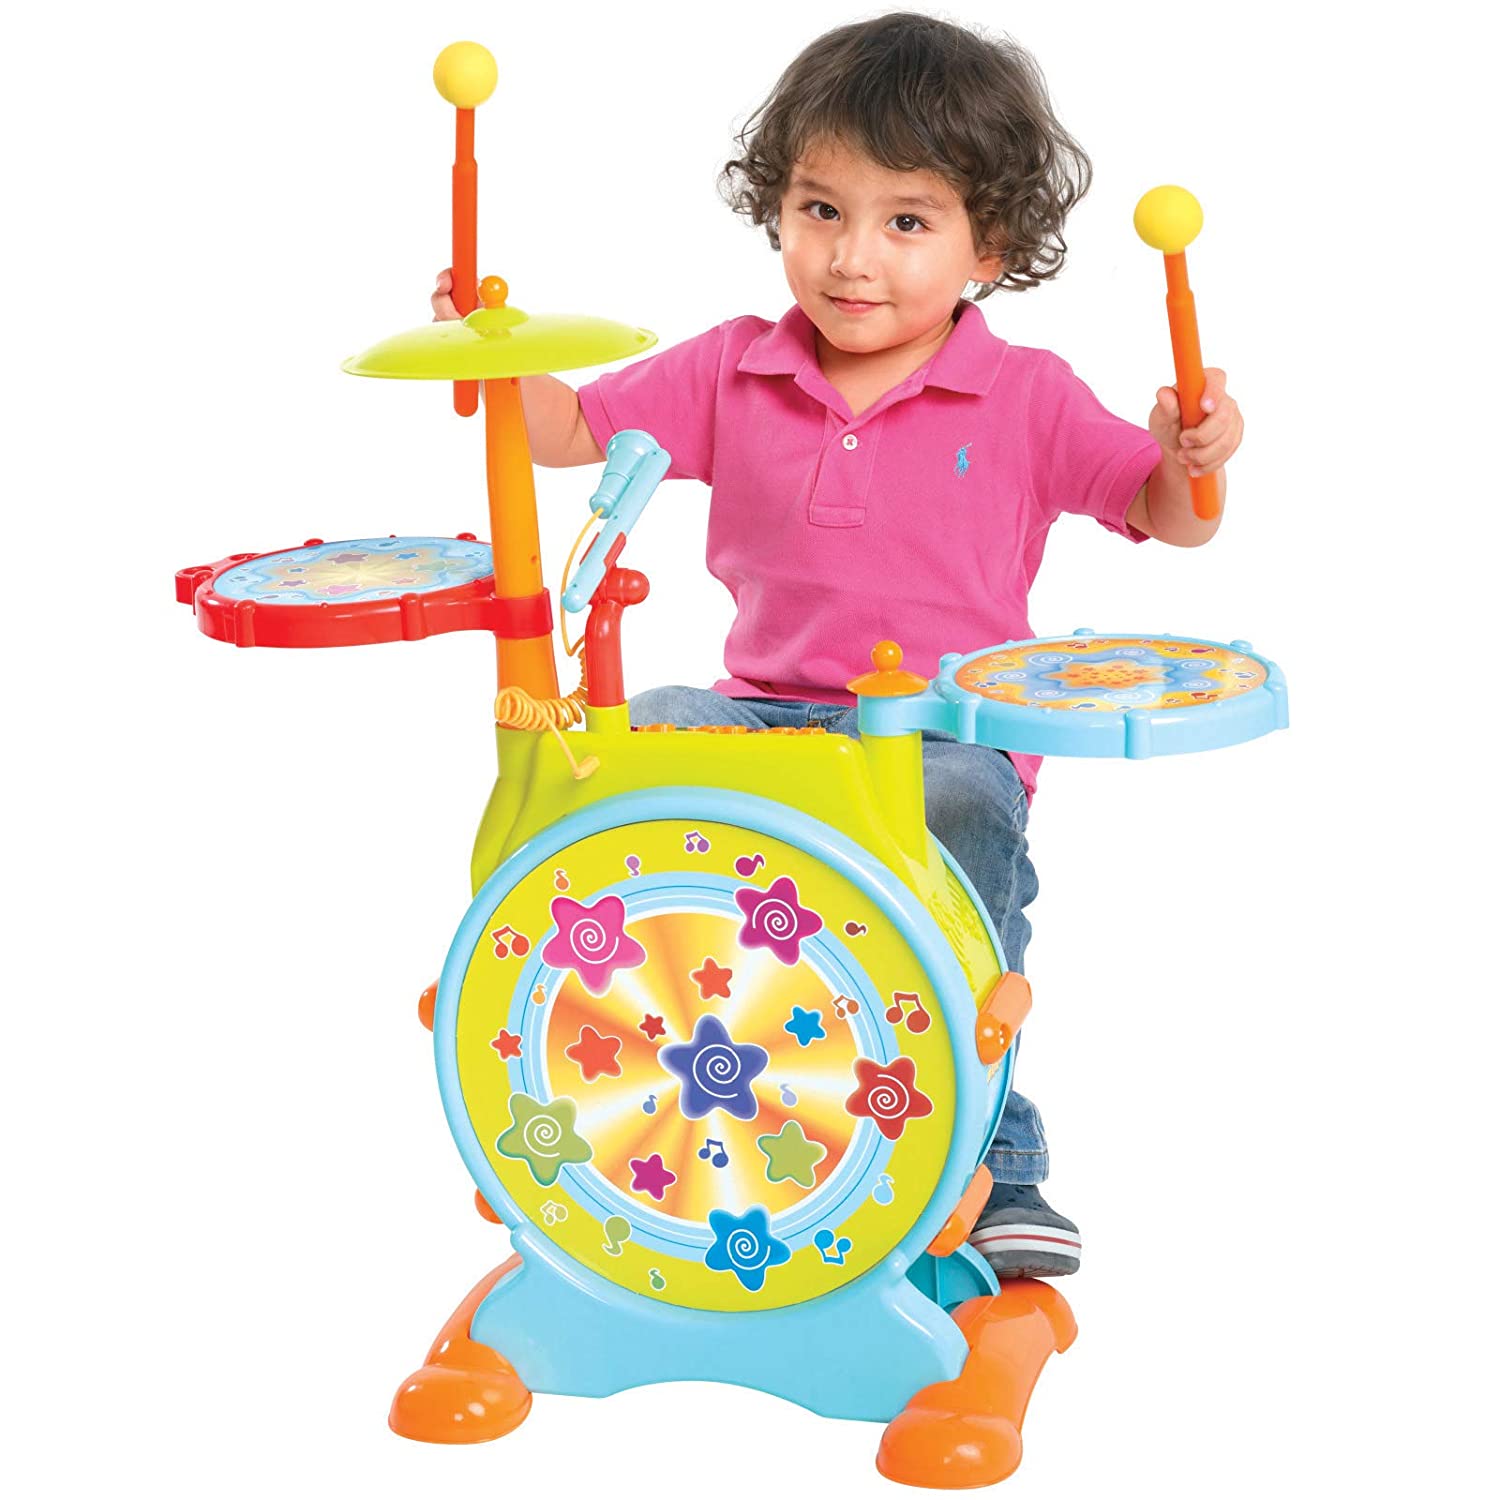 Best Choice Products Kids Electronic Toy Drum Set with Mic, Stool, Drumsticks, Multicolor